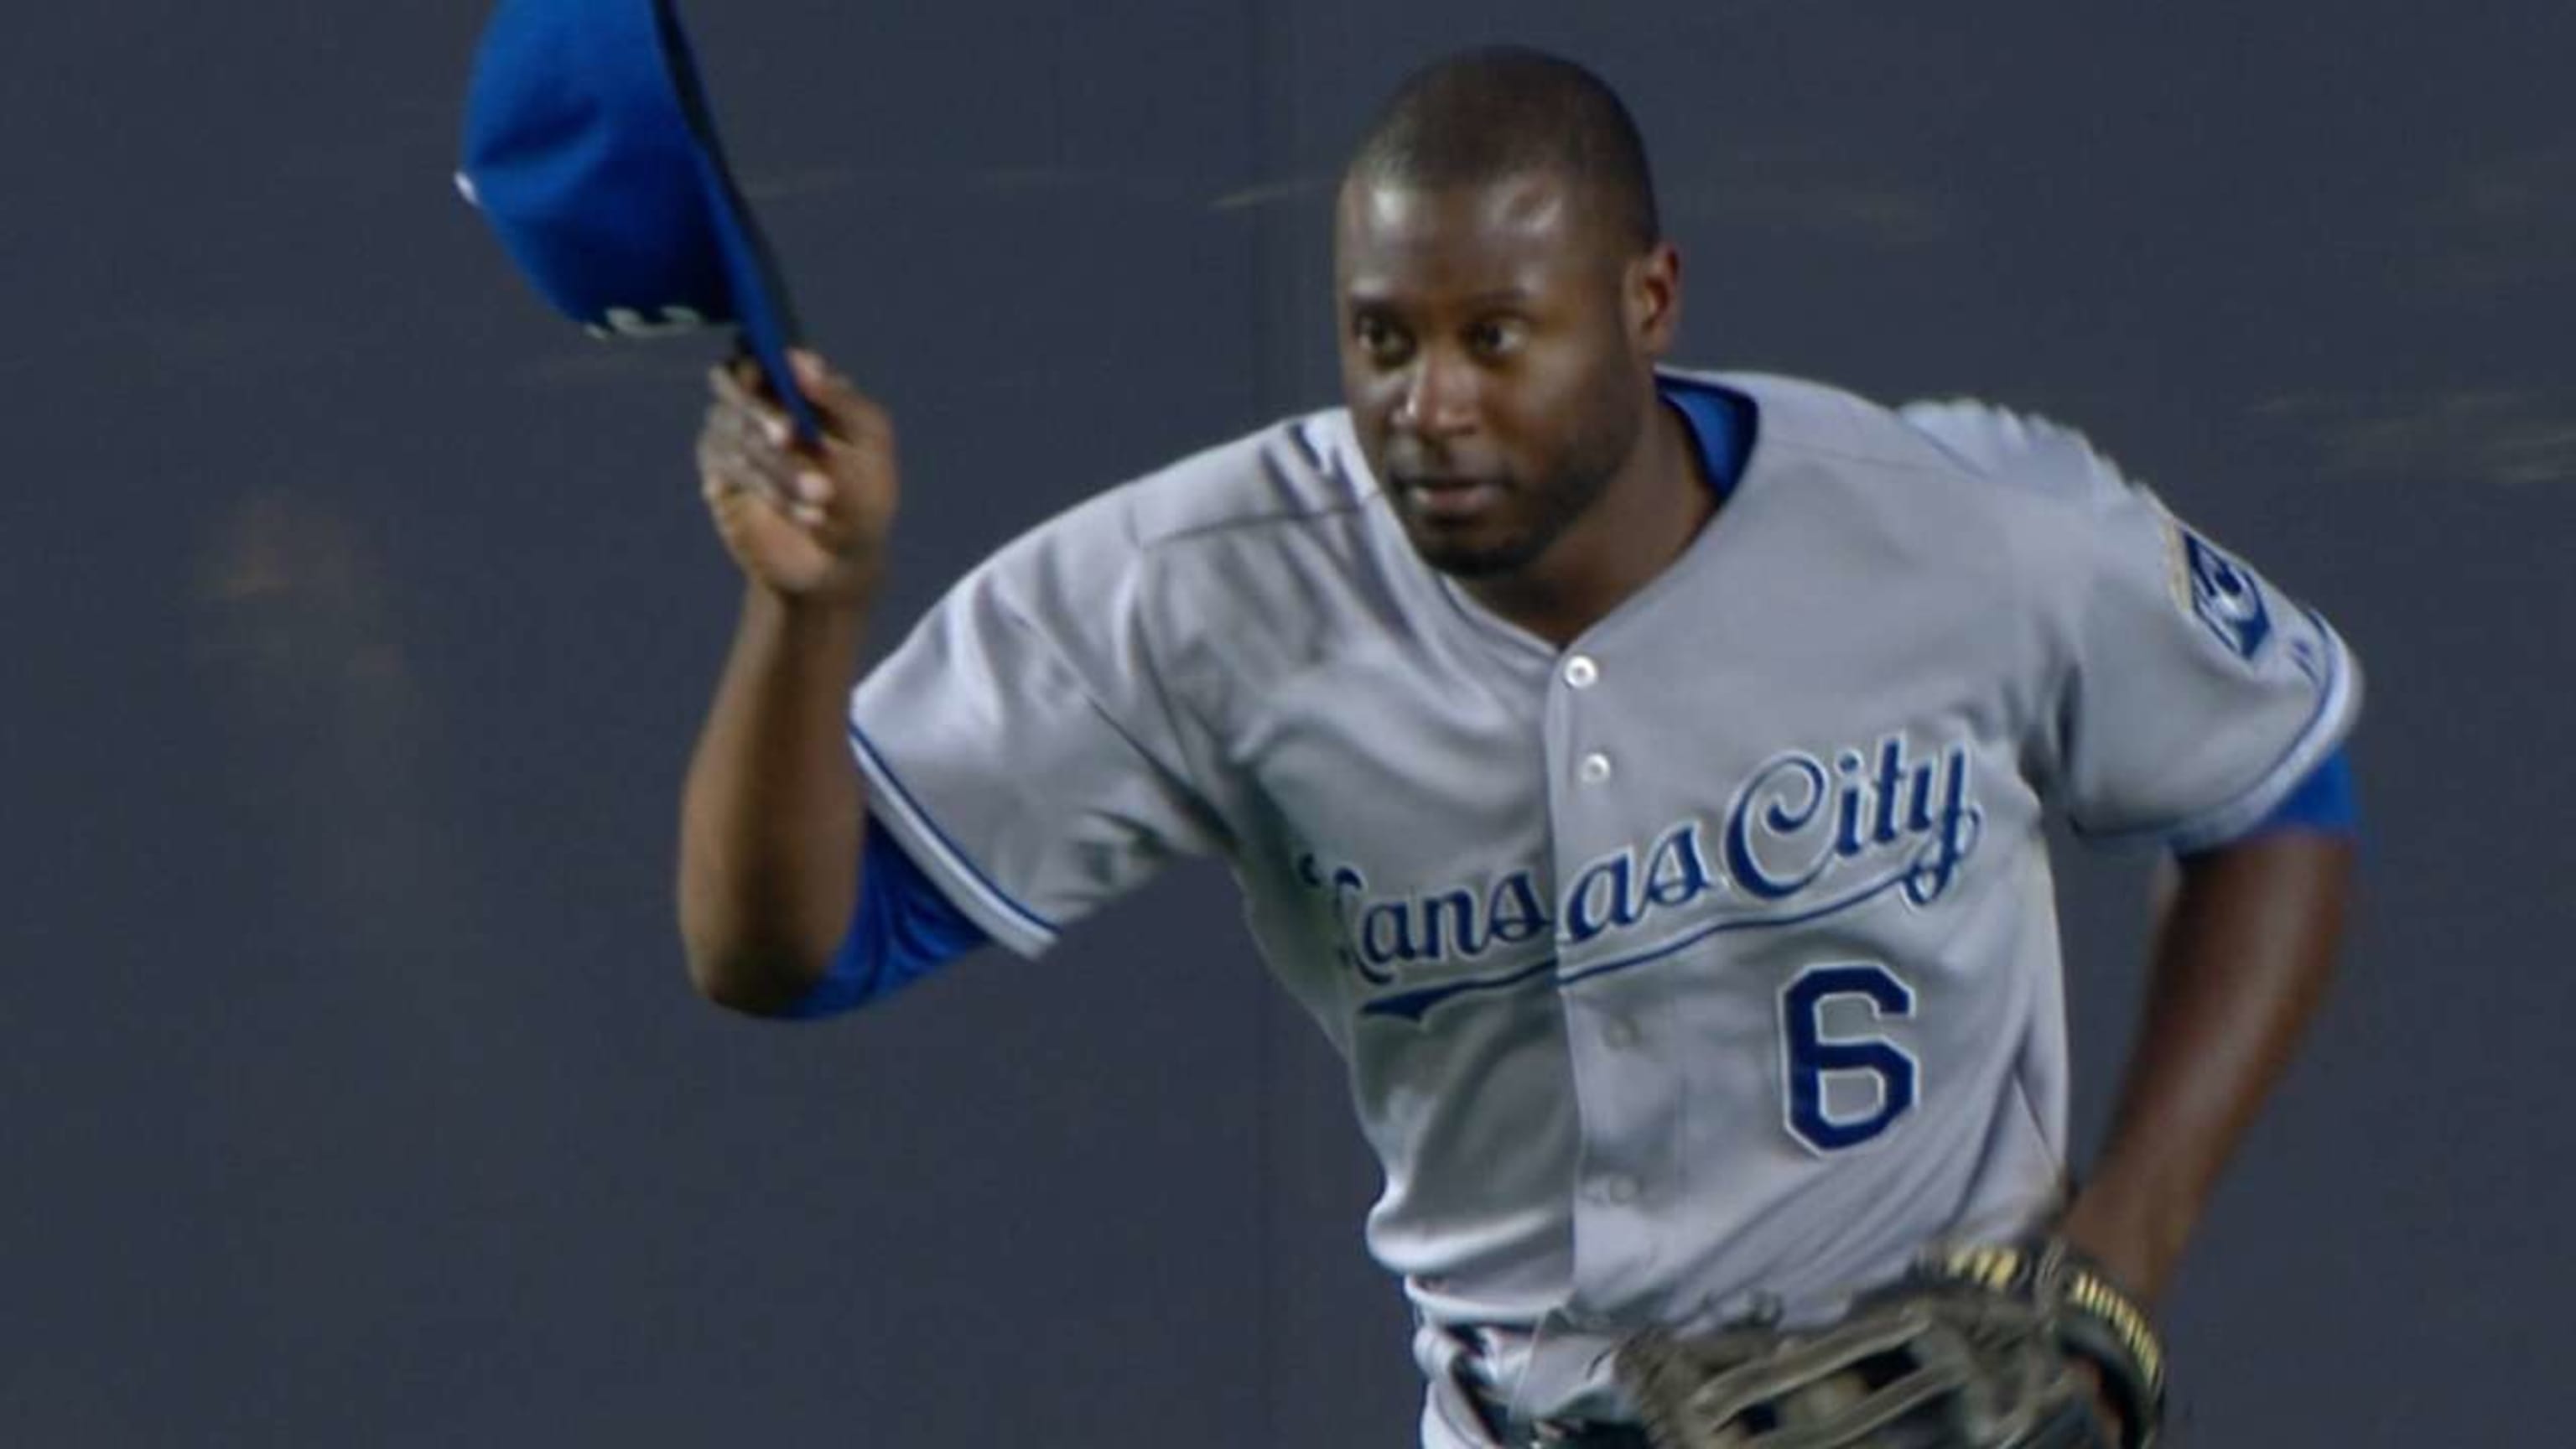 Lorenzo Cain relishes reaching 10 years MLB service but future unclear